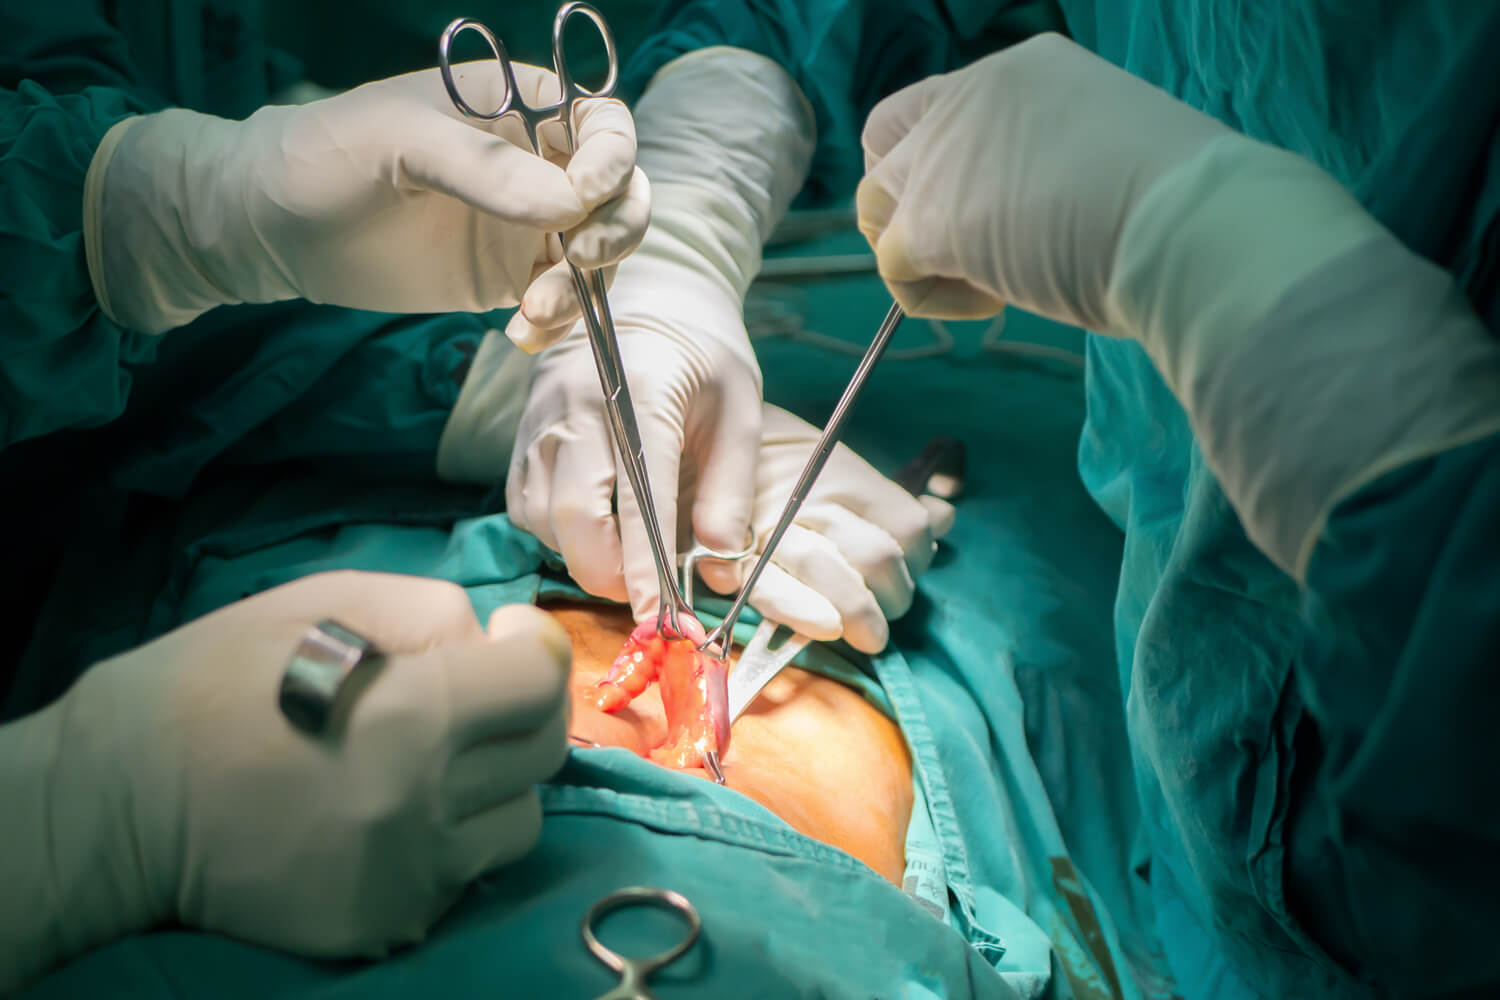 appendectomy surgery